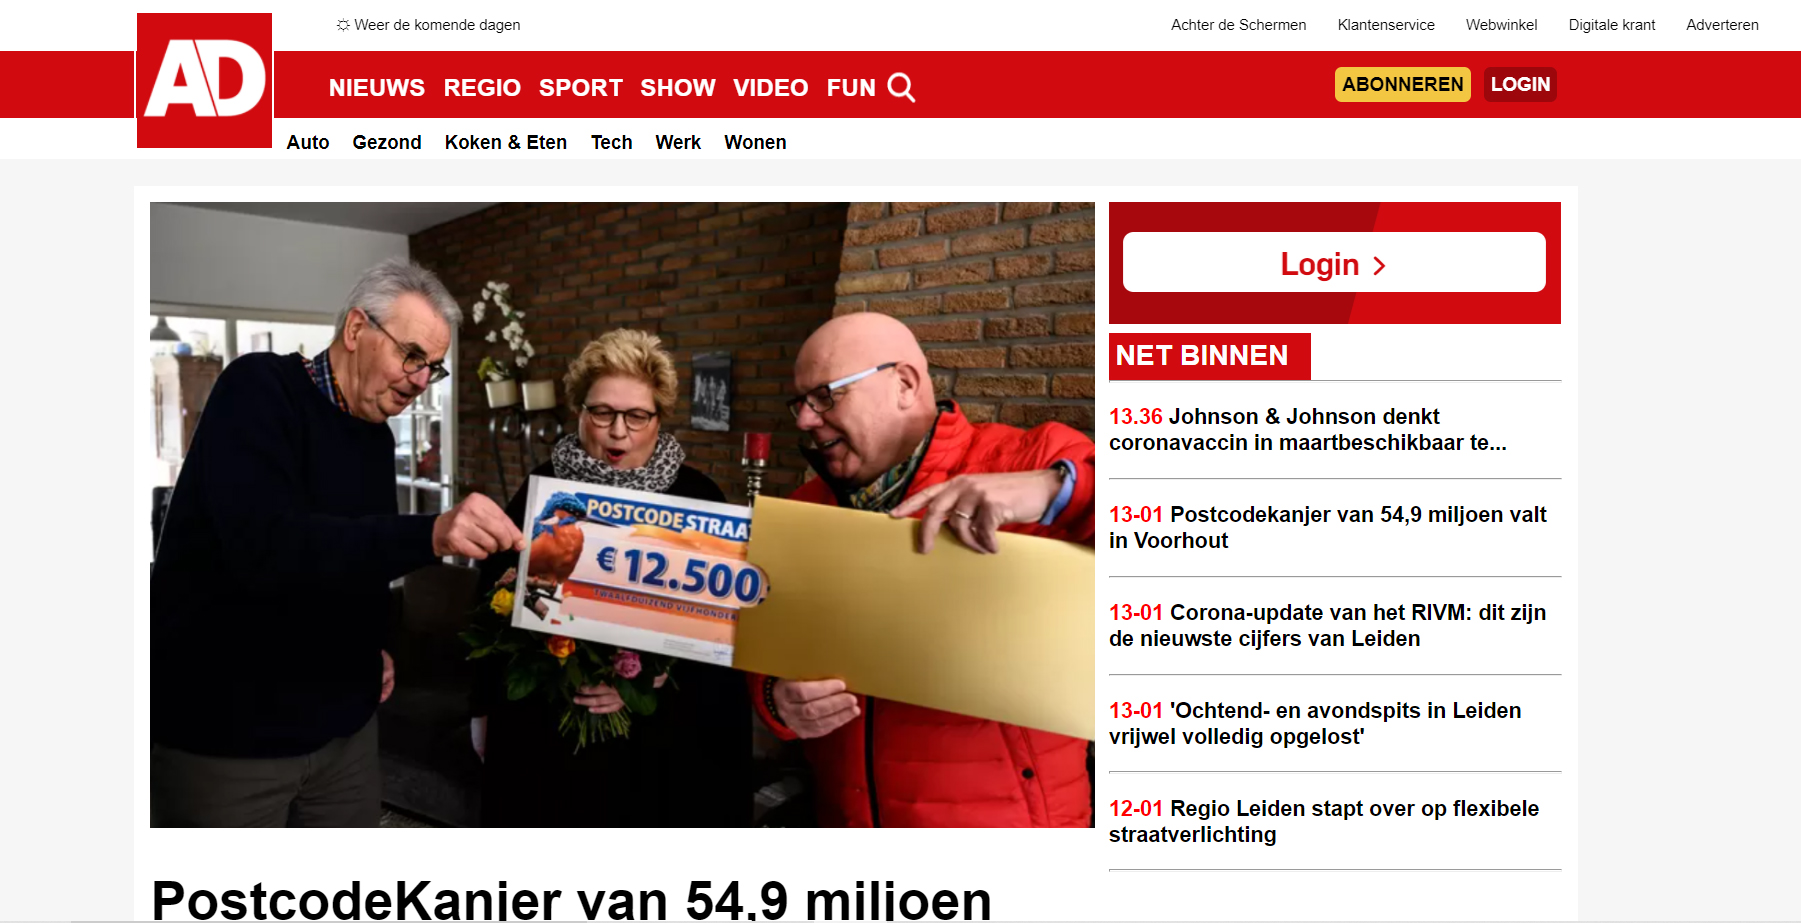 AD.nl oefening HTML, CSS